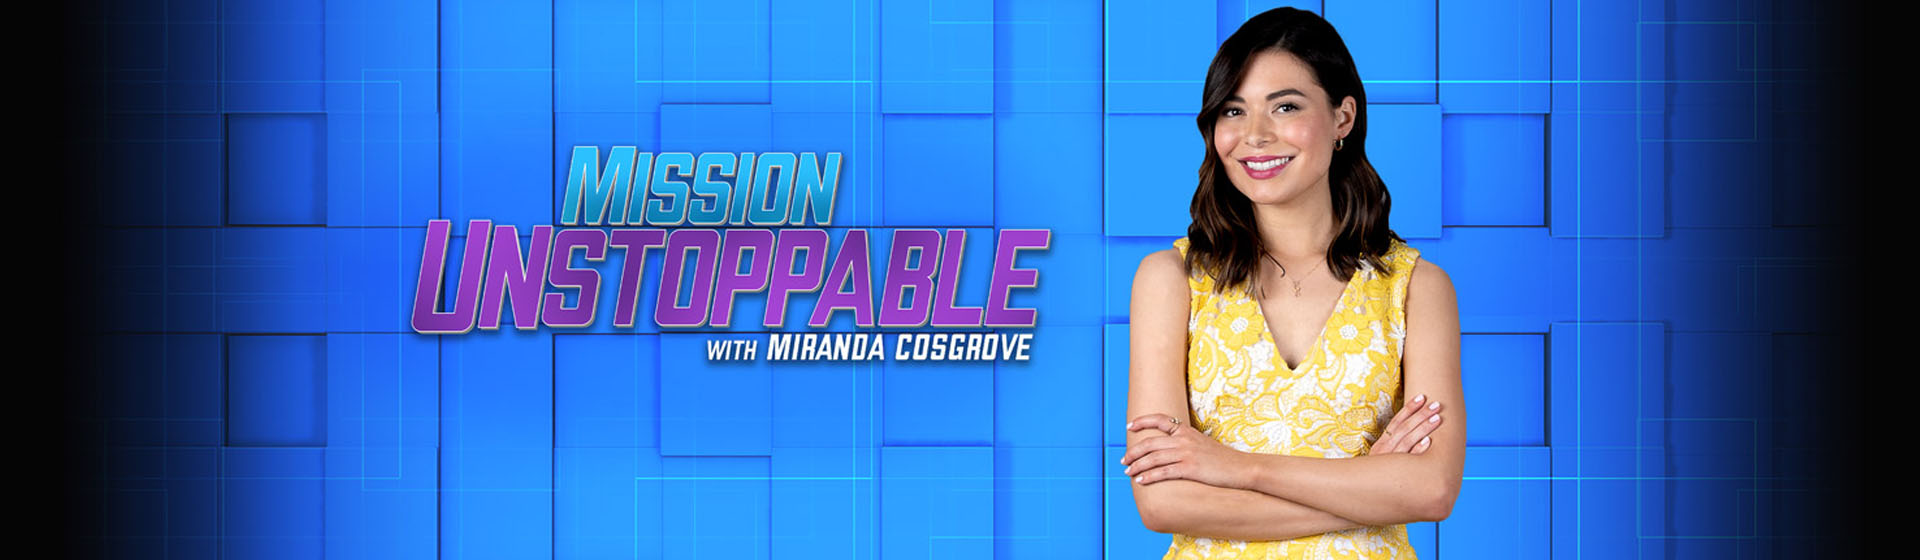 Mission Unstoppable With Miranda Cosgrove